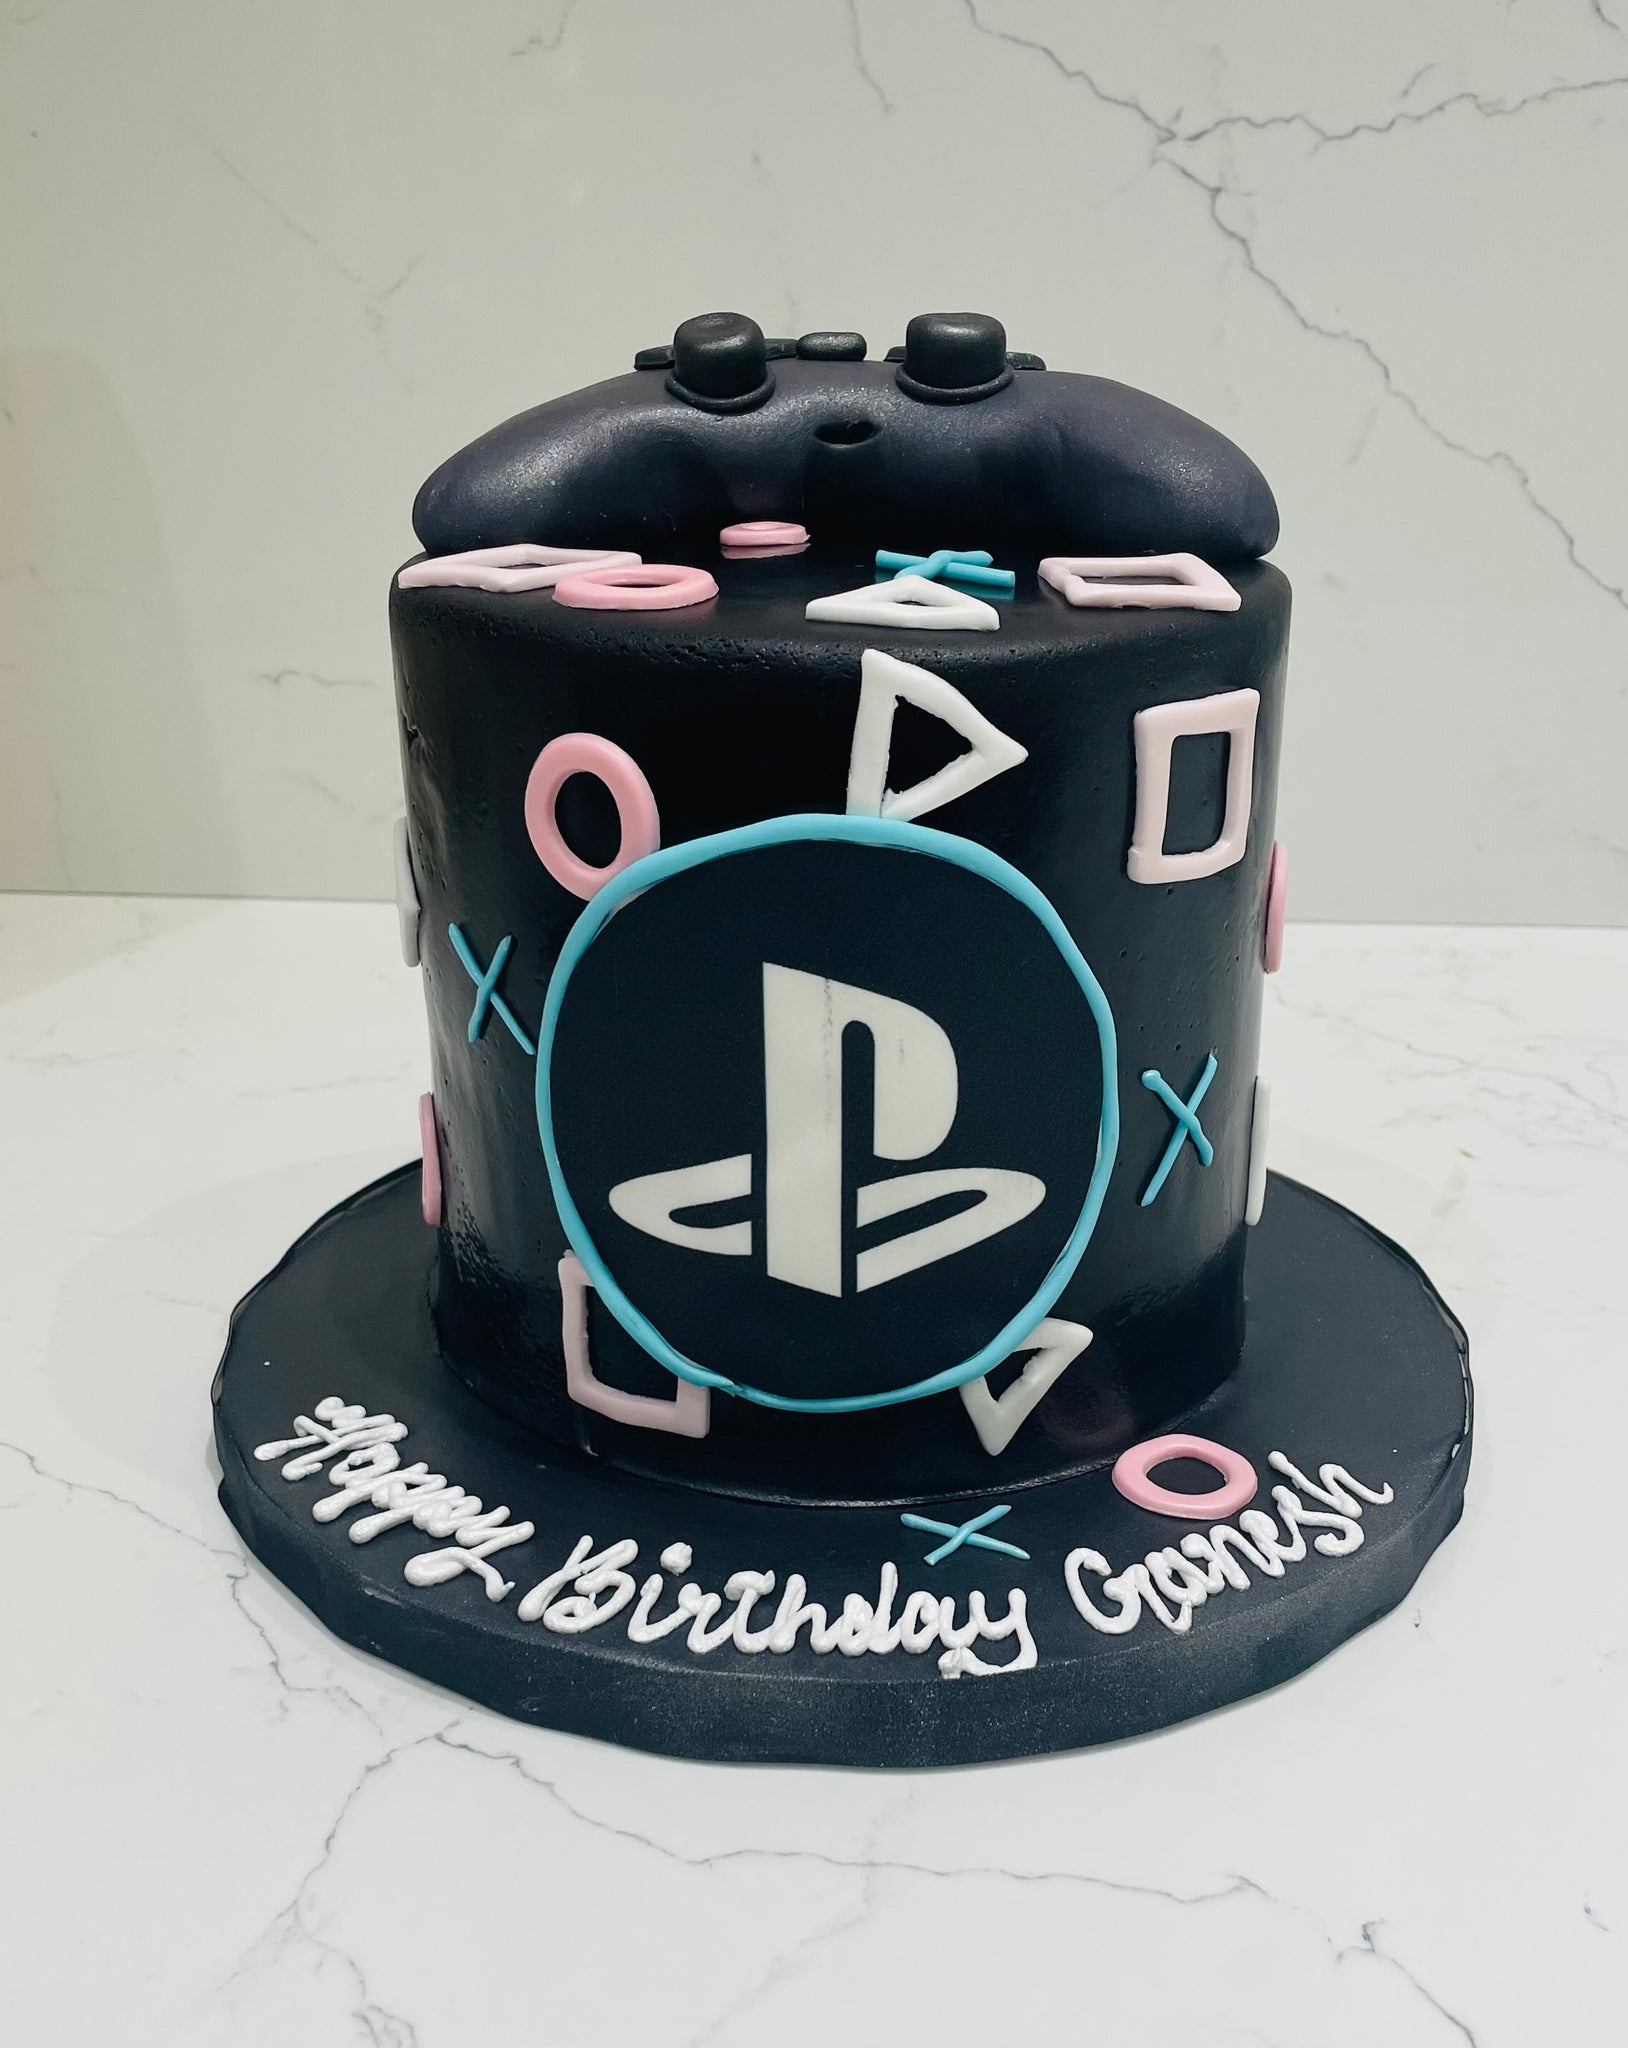 21 Fortnite cake ideas to make the next birthday party special - Legit.ng